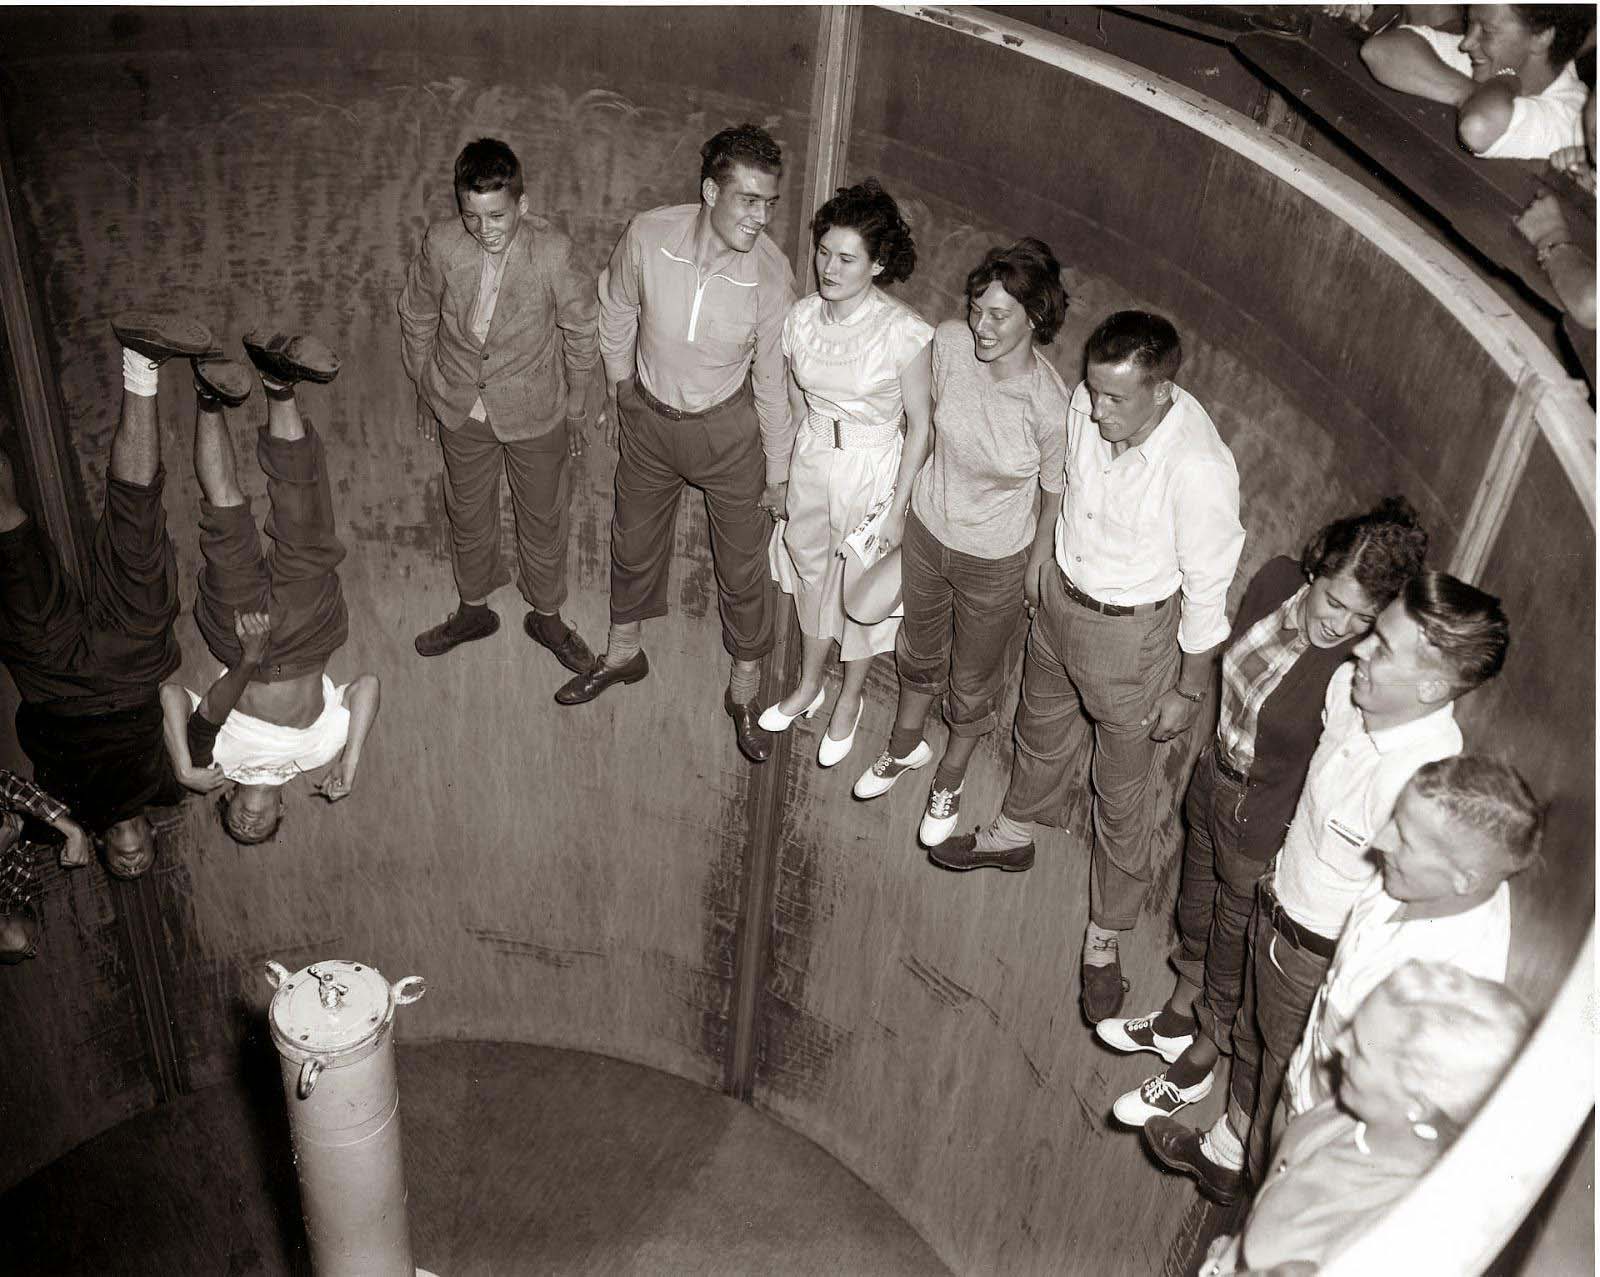 The Coney Island Rotor ride. Back when rides were fun and dangerous.